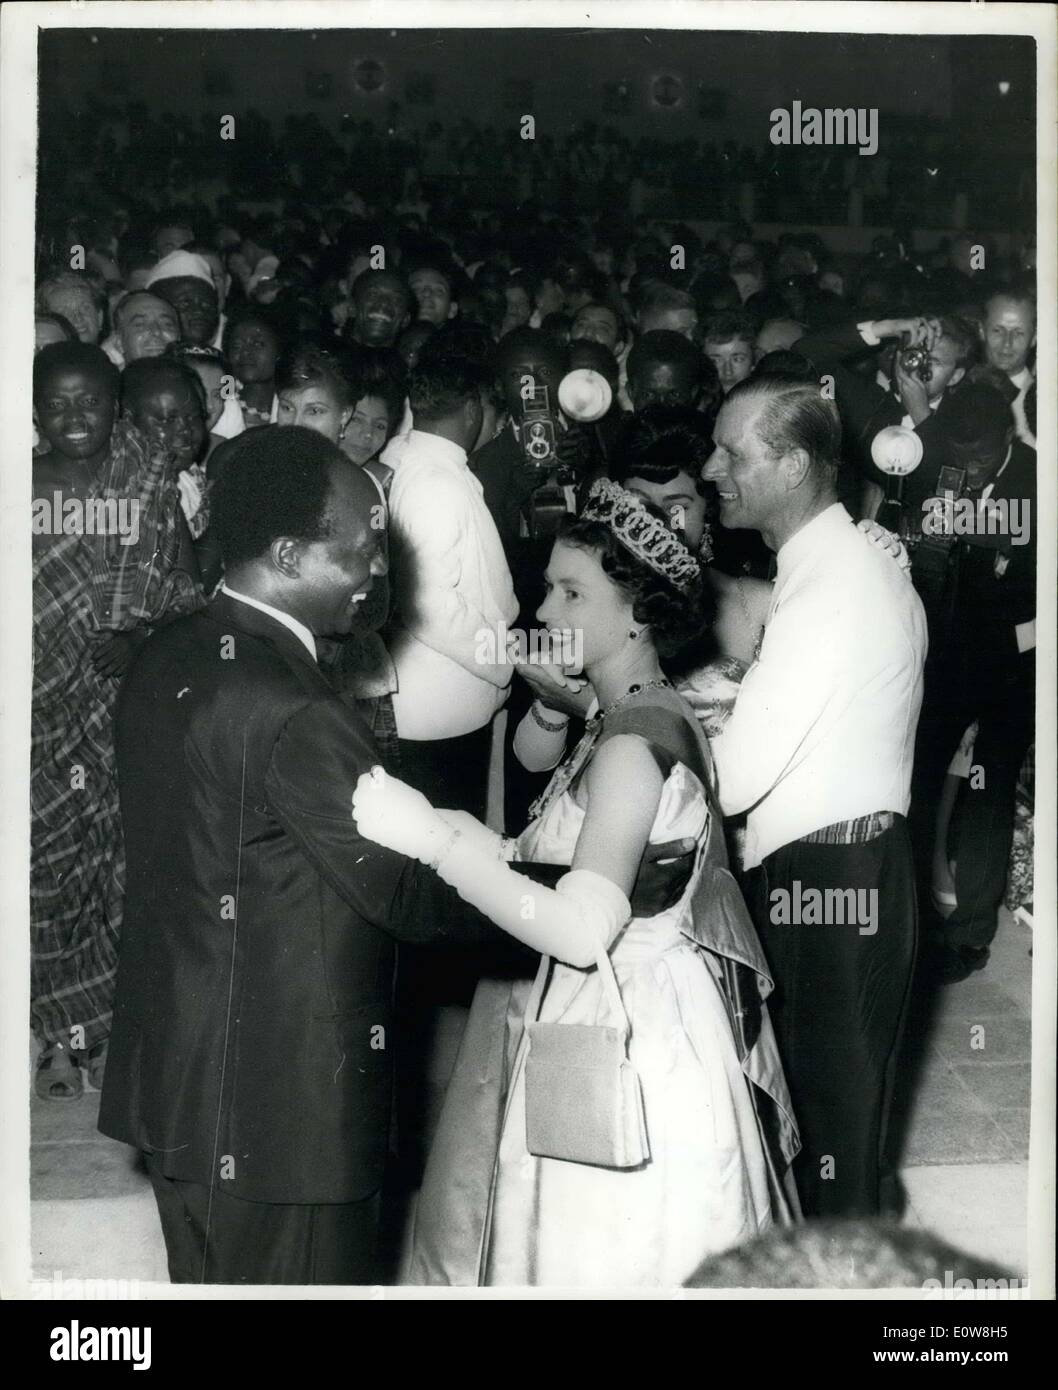 Nov. 20, 1961 - Queen Dances ''High Life'' -- With Dr. NkrumahNight Out  In Accra: H.M. The Queen and Dr. Nkrumah the President poof Ghana seen as  they dance ''High life'' a